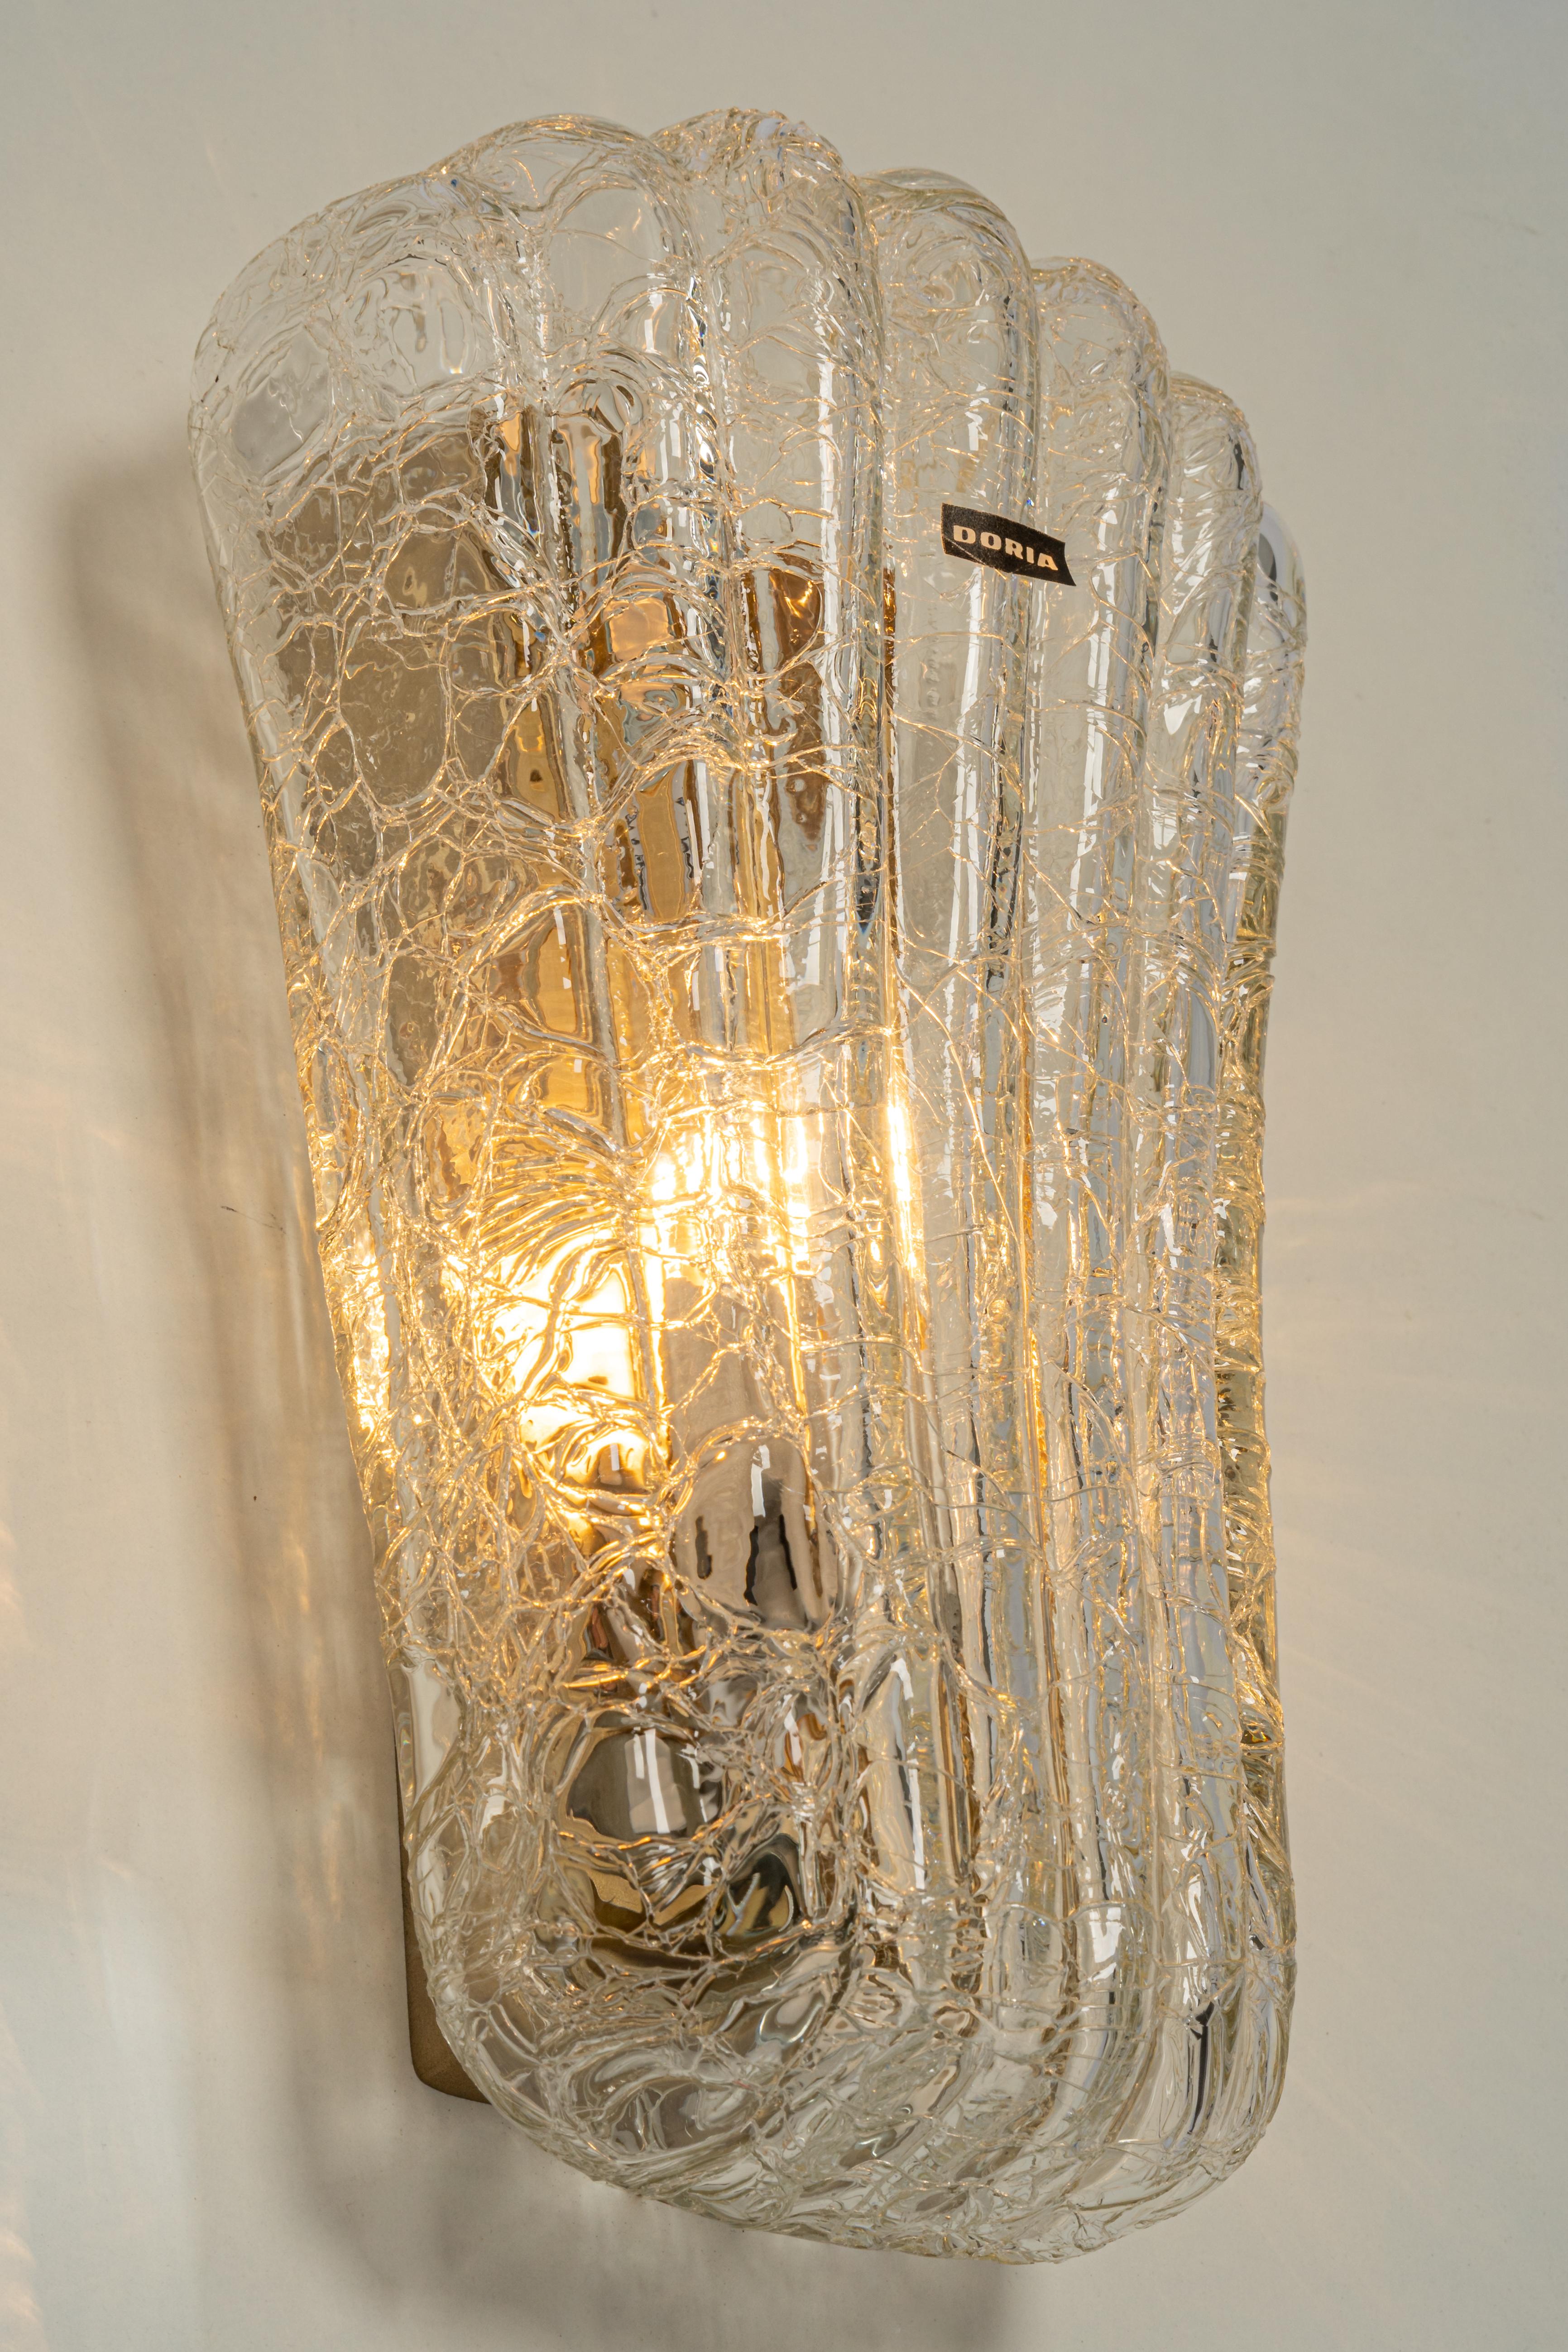 Mid-20th Century Pair of Murano Glass Wall Sconces by Doria, Germany, 1960s For Sale